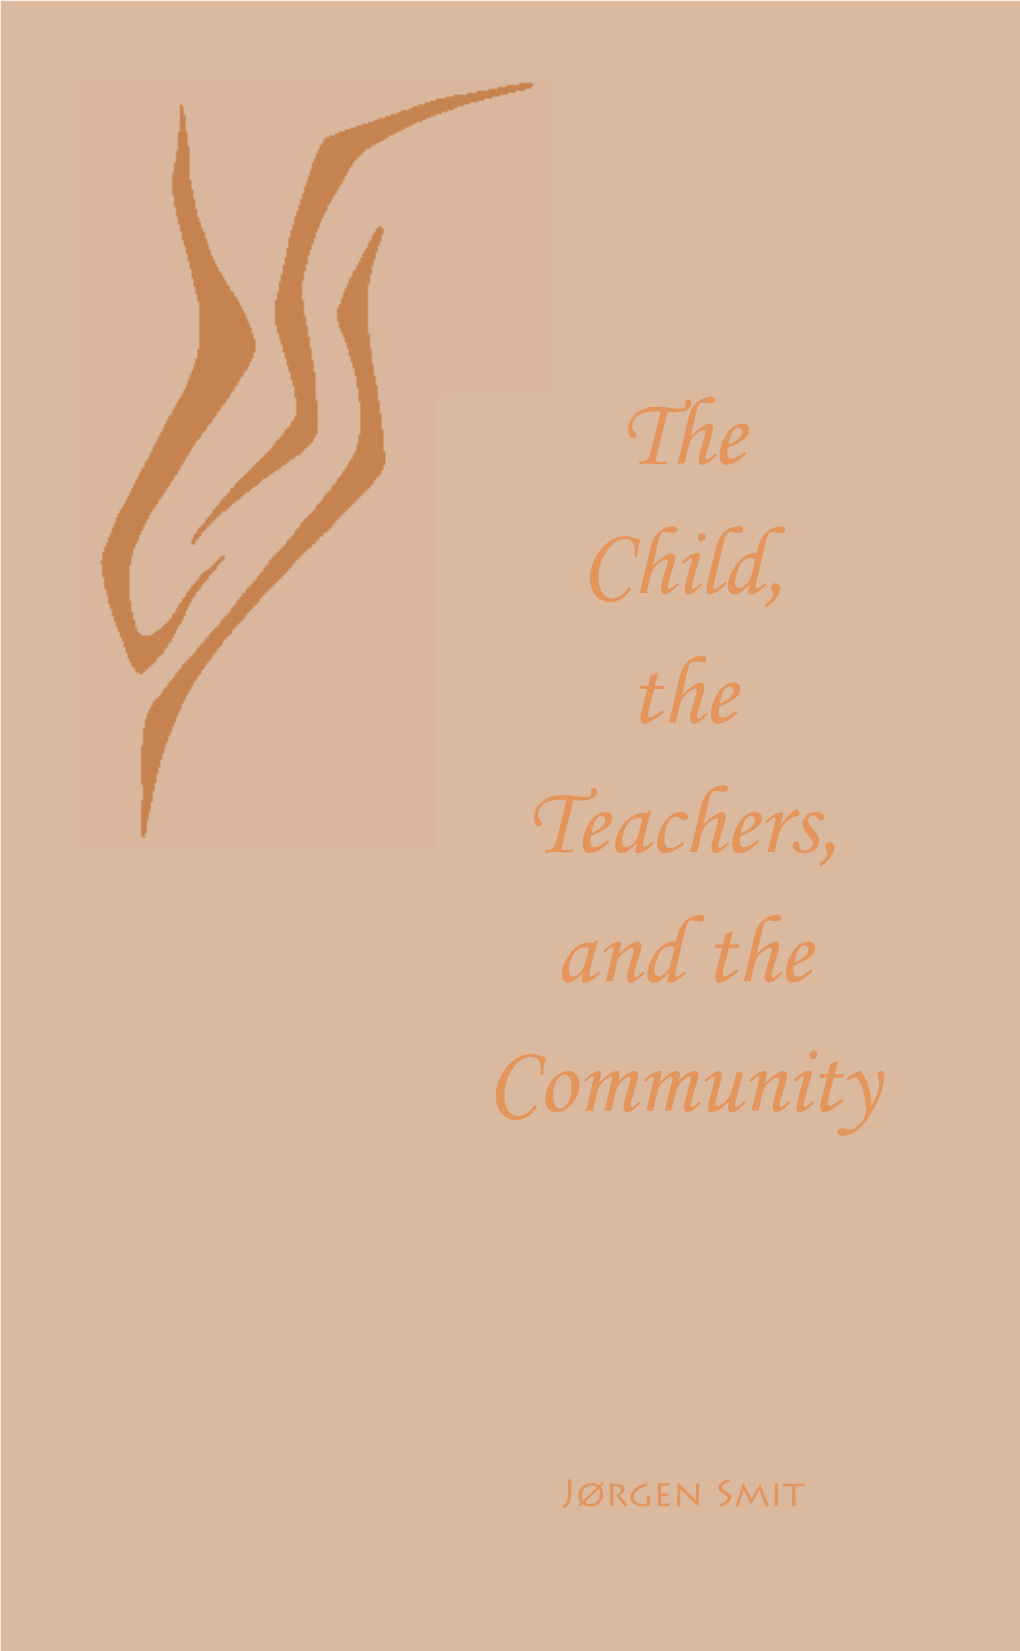 The Child, the Teachers, and the Community